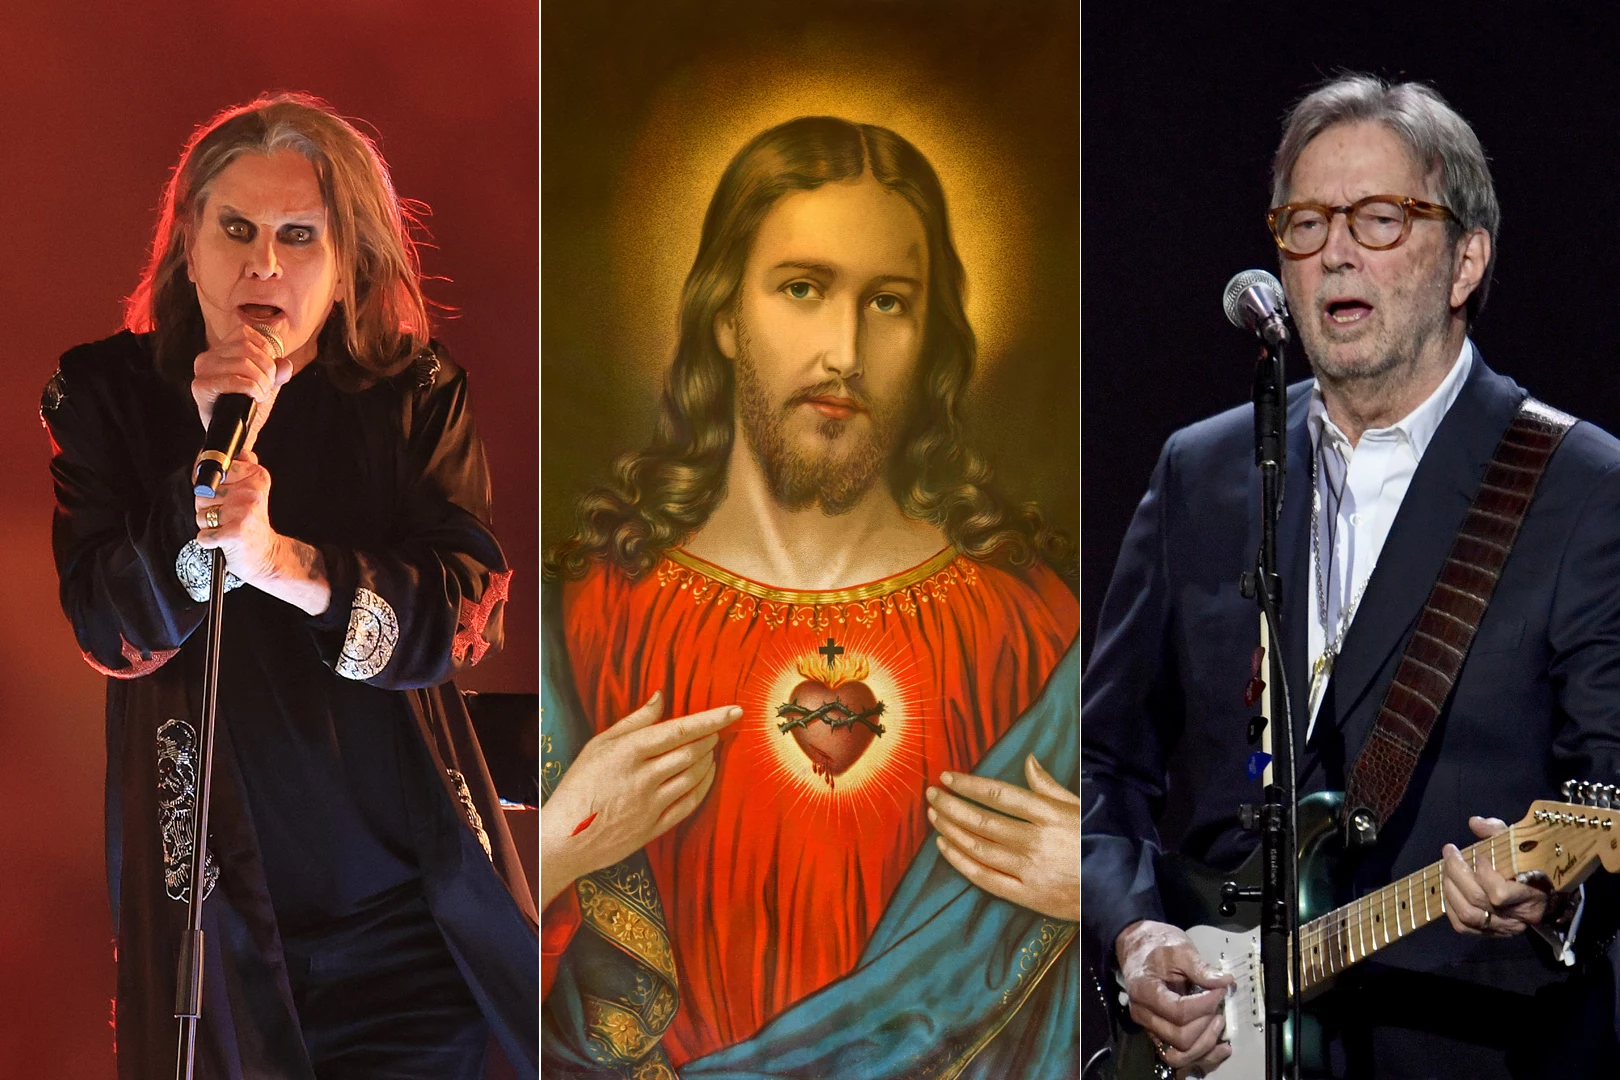 Ozzy Osbourne performs at 2022 Commonwealth Games, heart of jesus Christ portrait 1899, eric clapton performs at music for marsden in london 2020